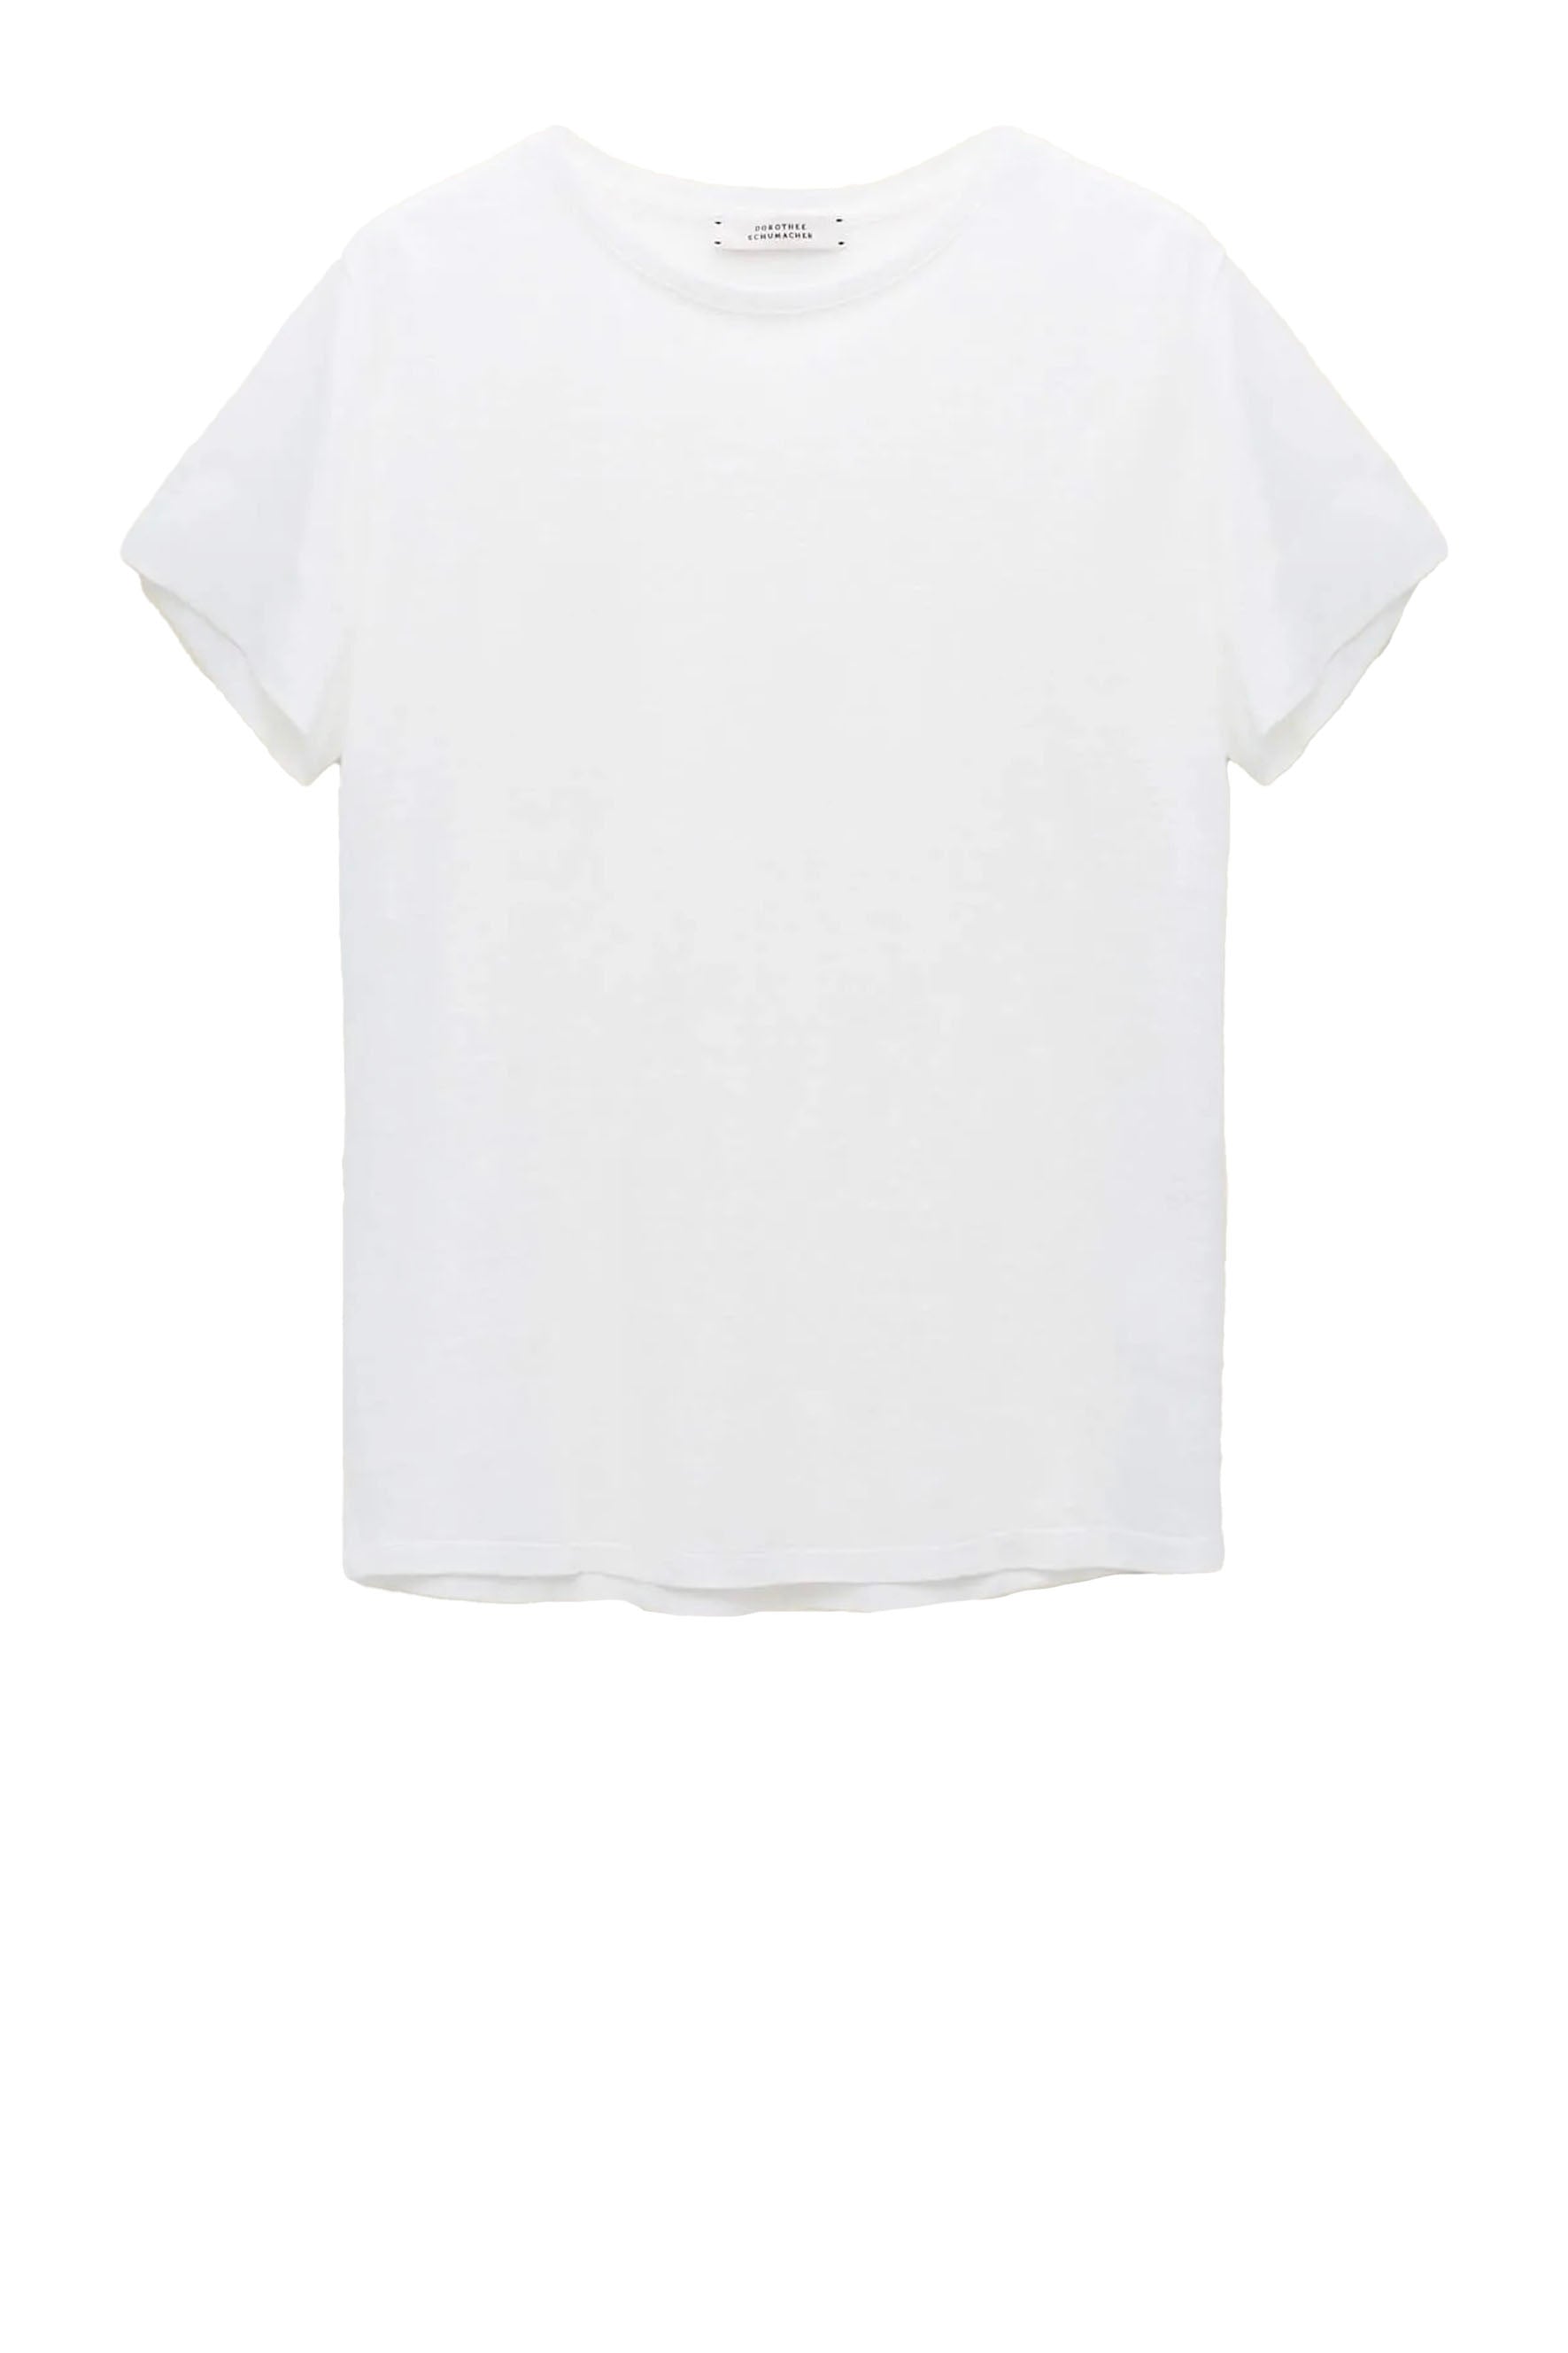 all time favorite tee - white